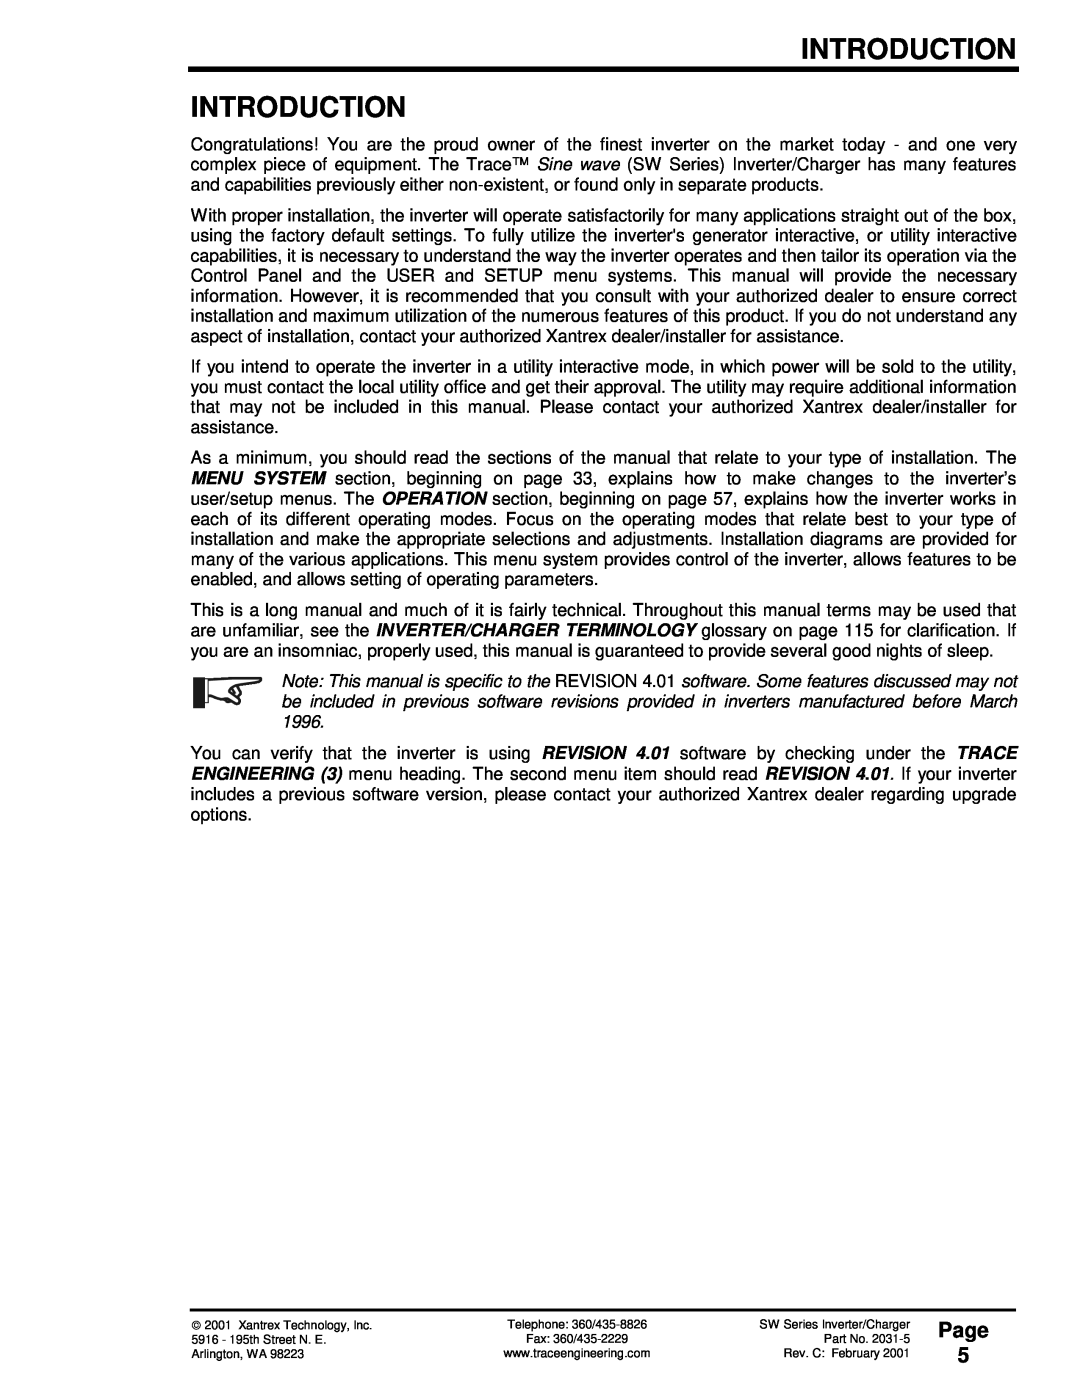 Xantrex Technology SW Series owner manual Introduction Introduction, Page 5 